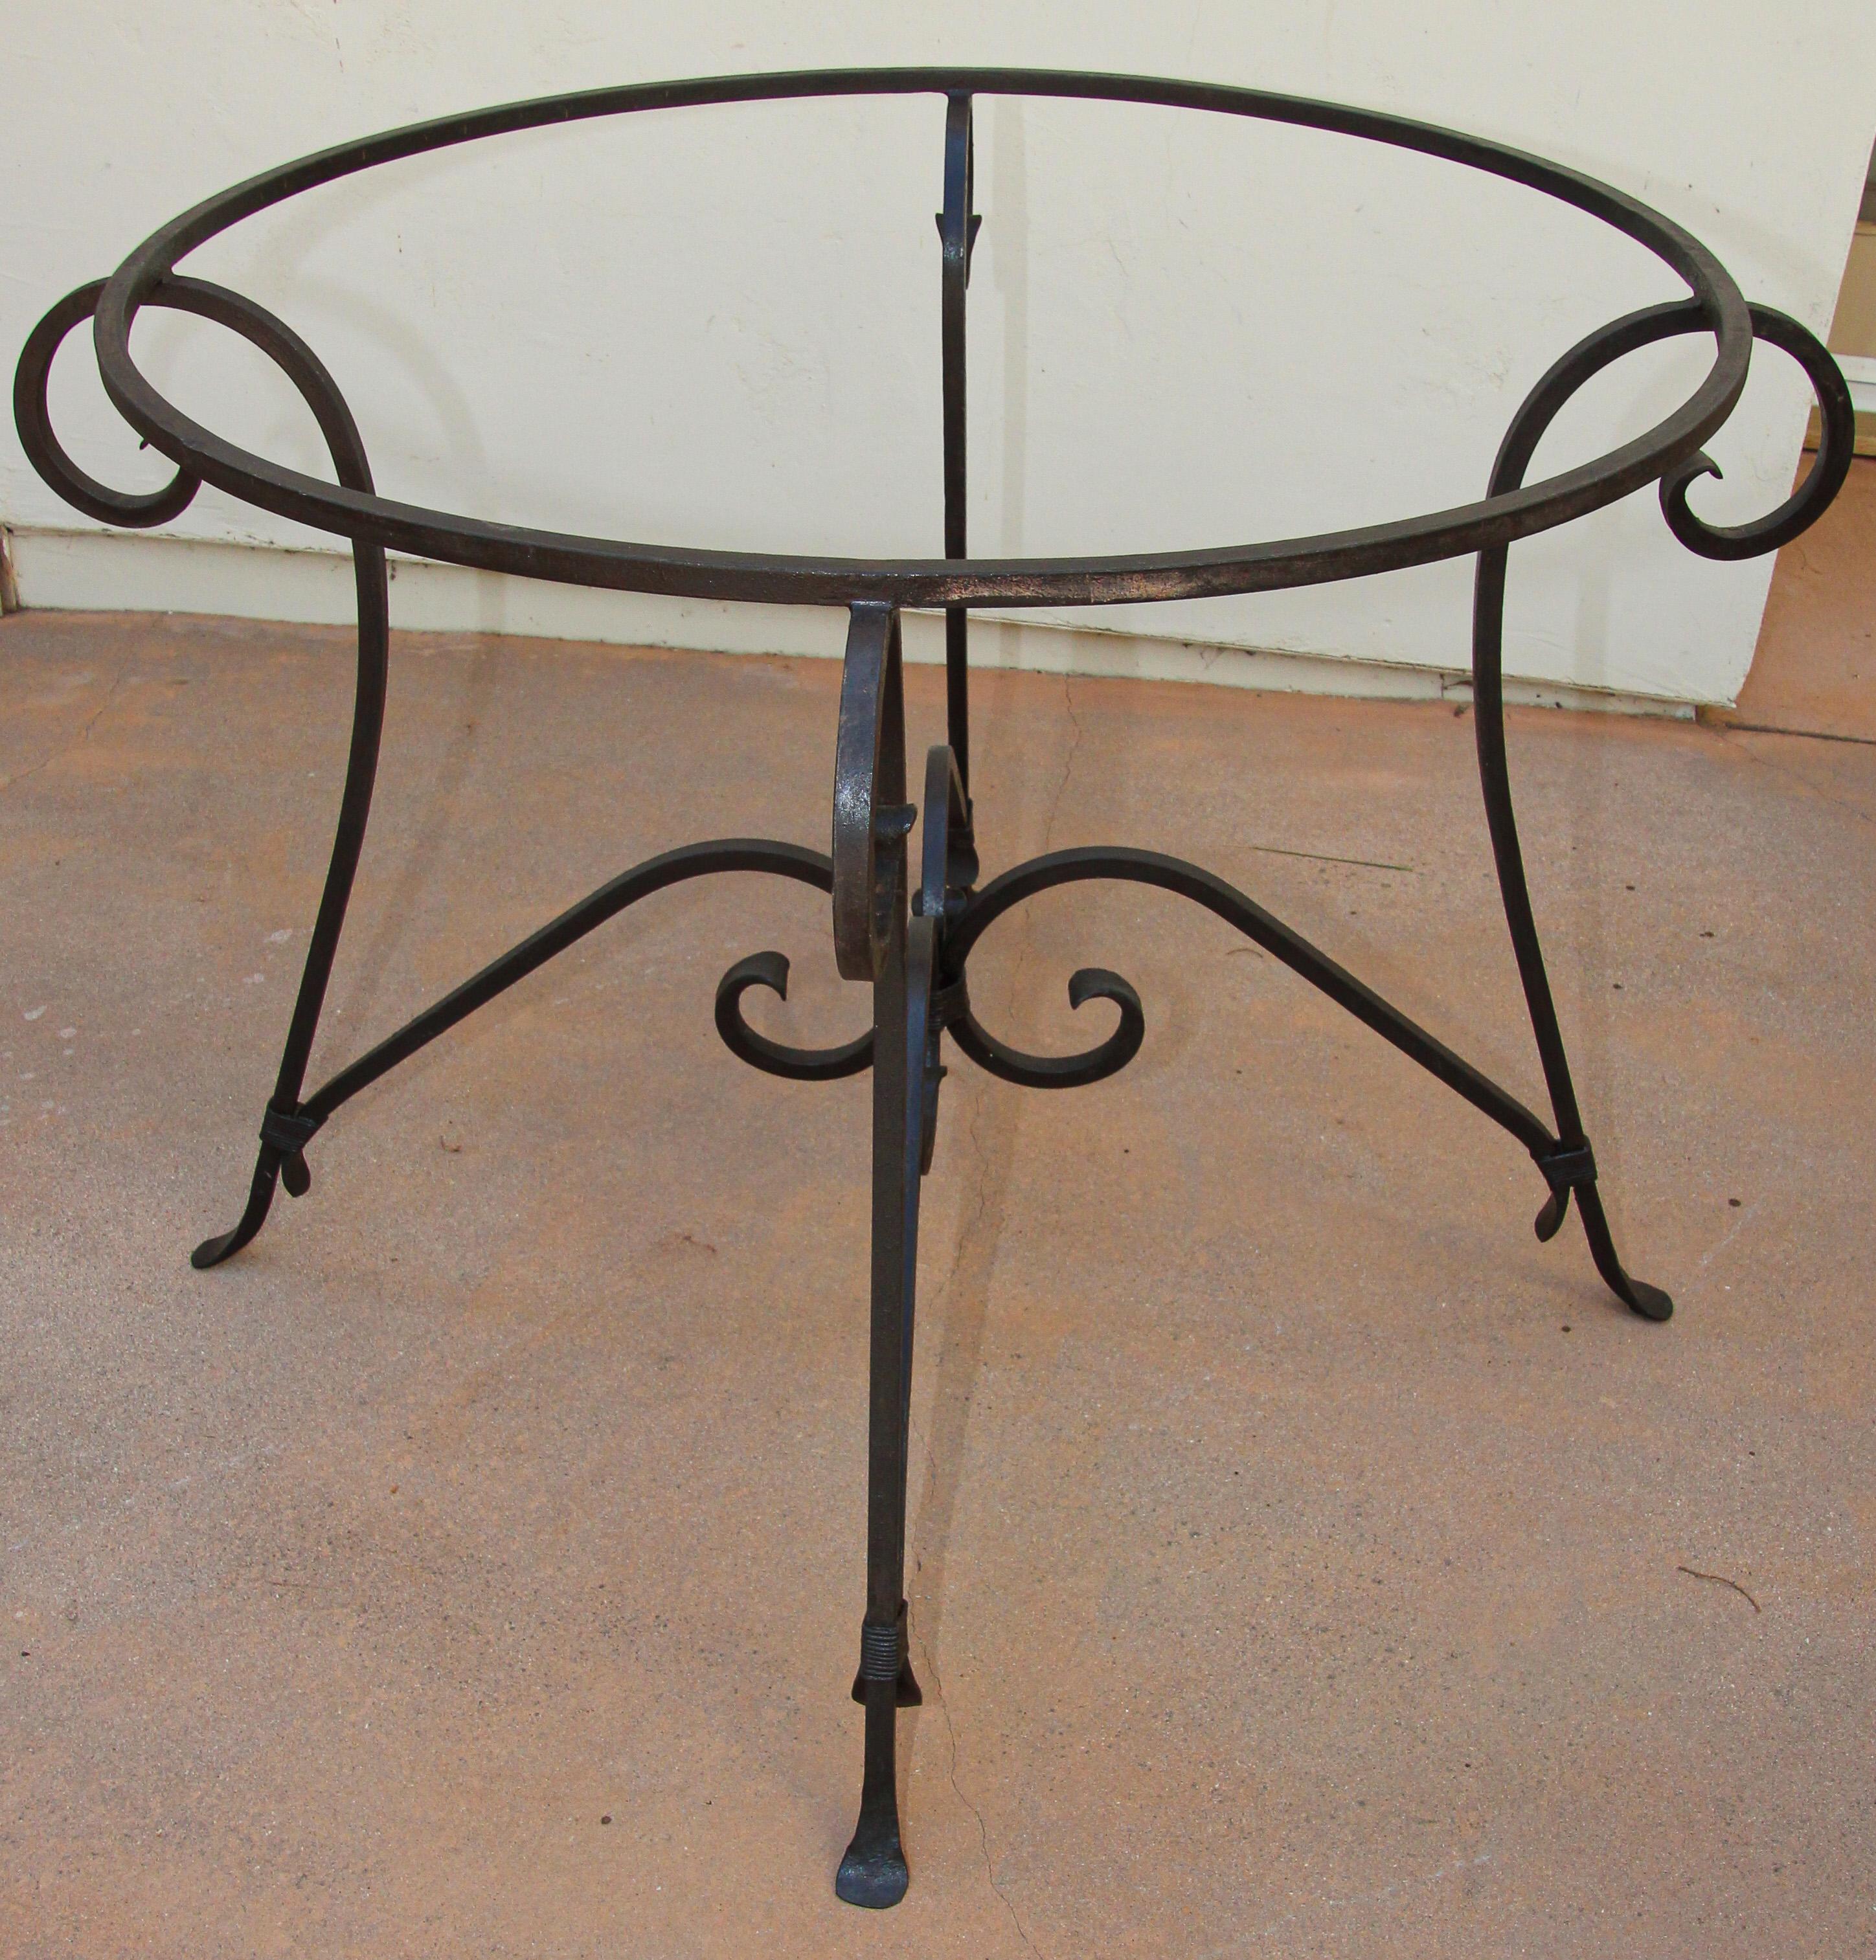 Spanish Colonial Spanish Wrought Iron Dining Table Base Indoor or Outdoor For Sale